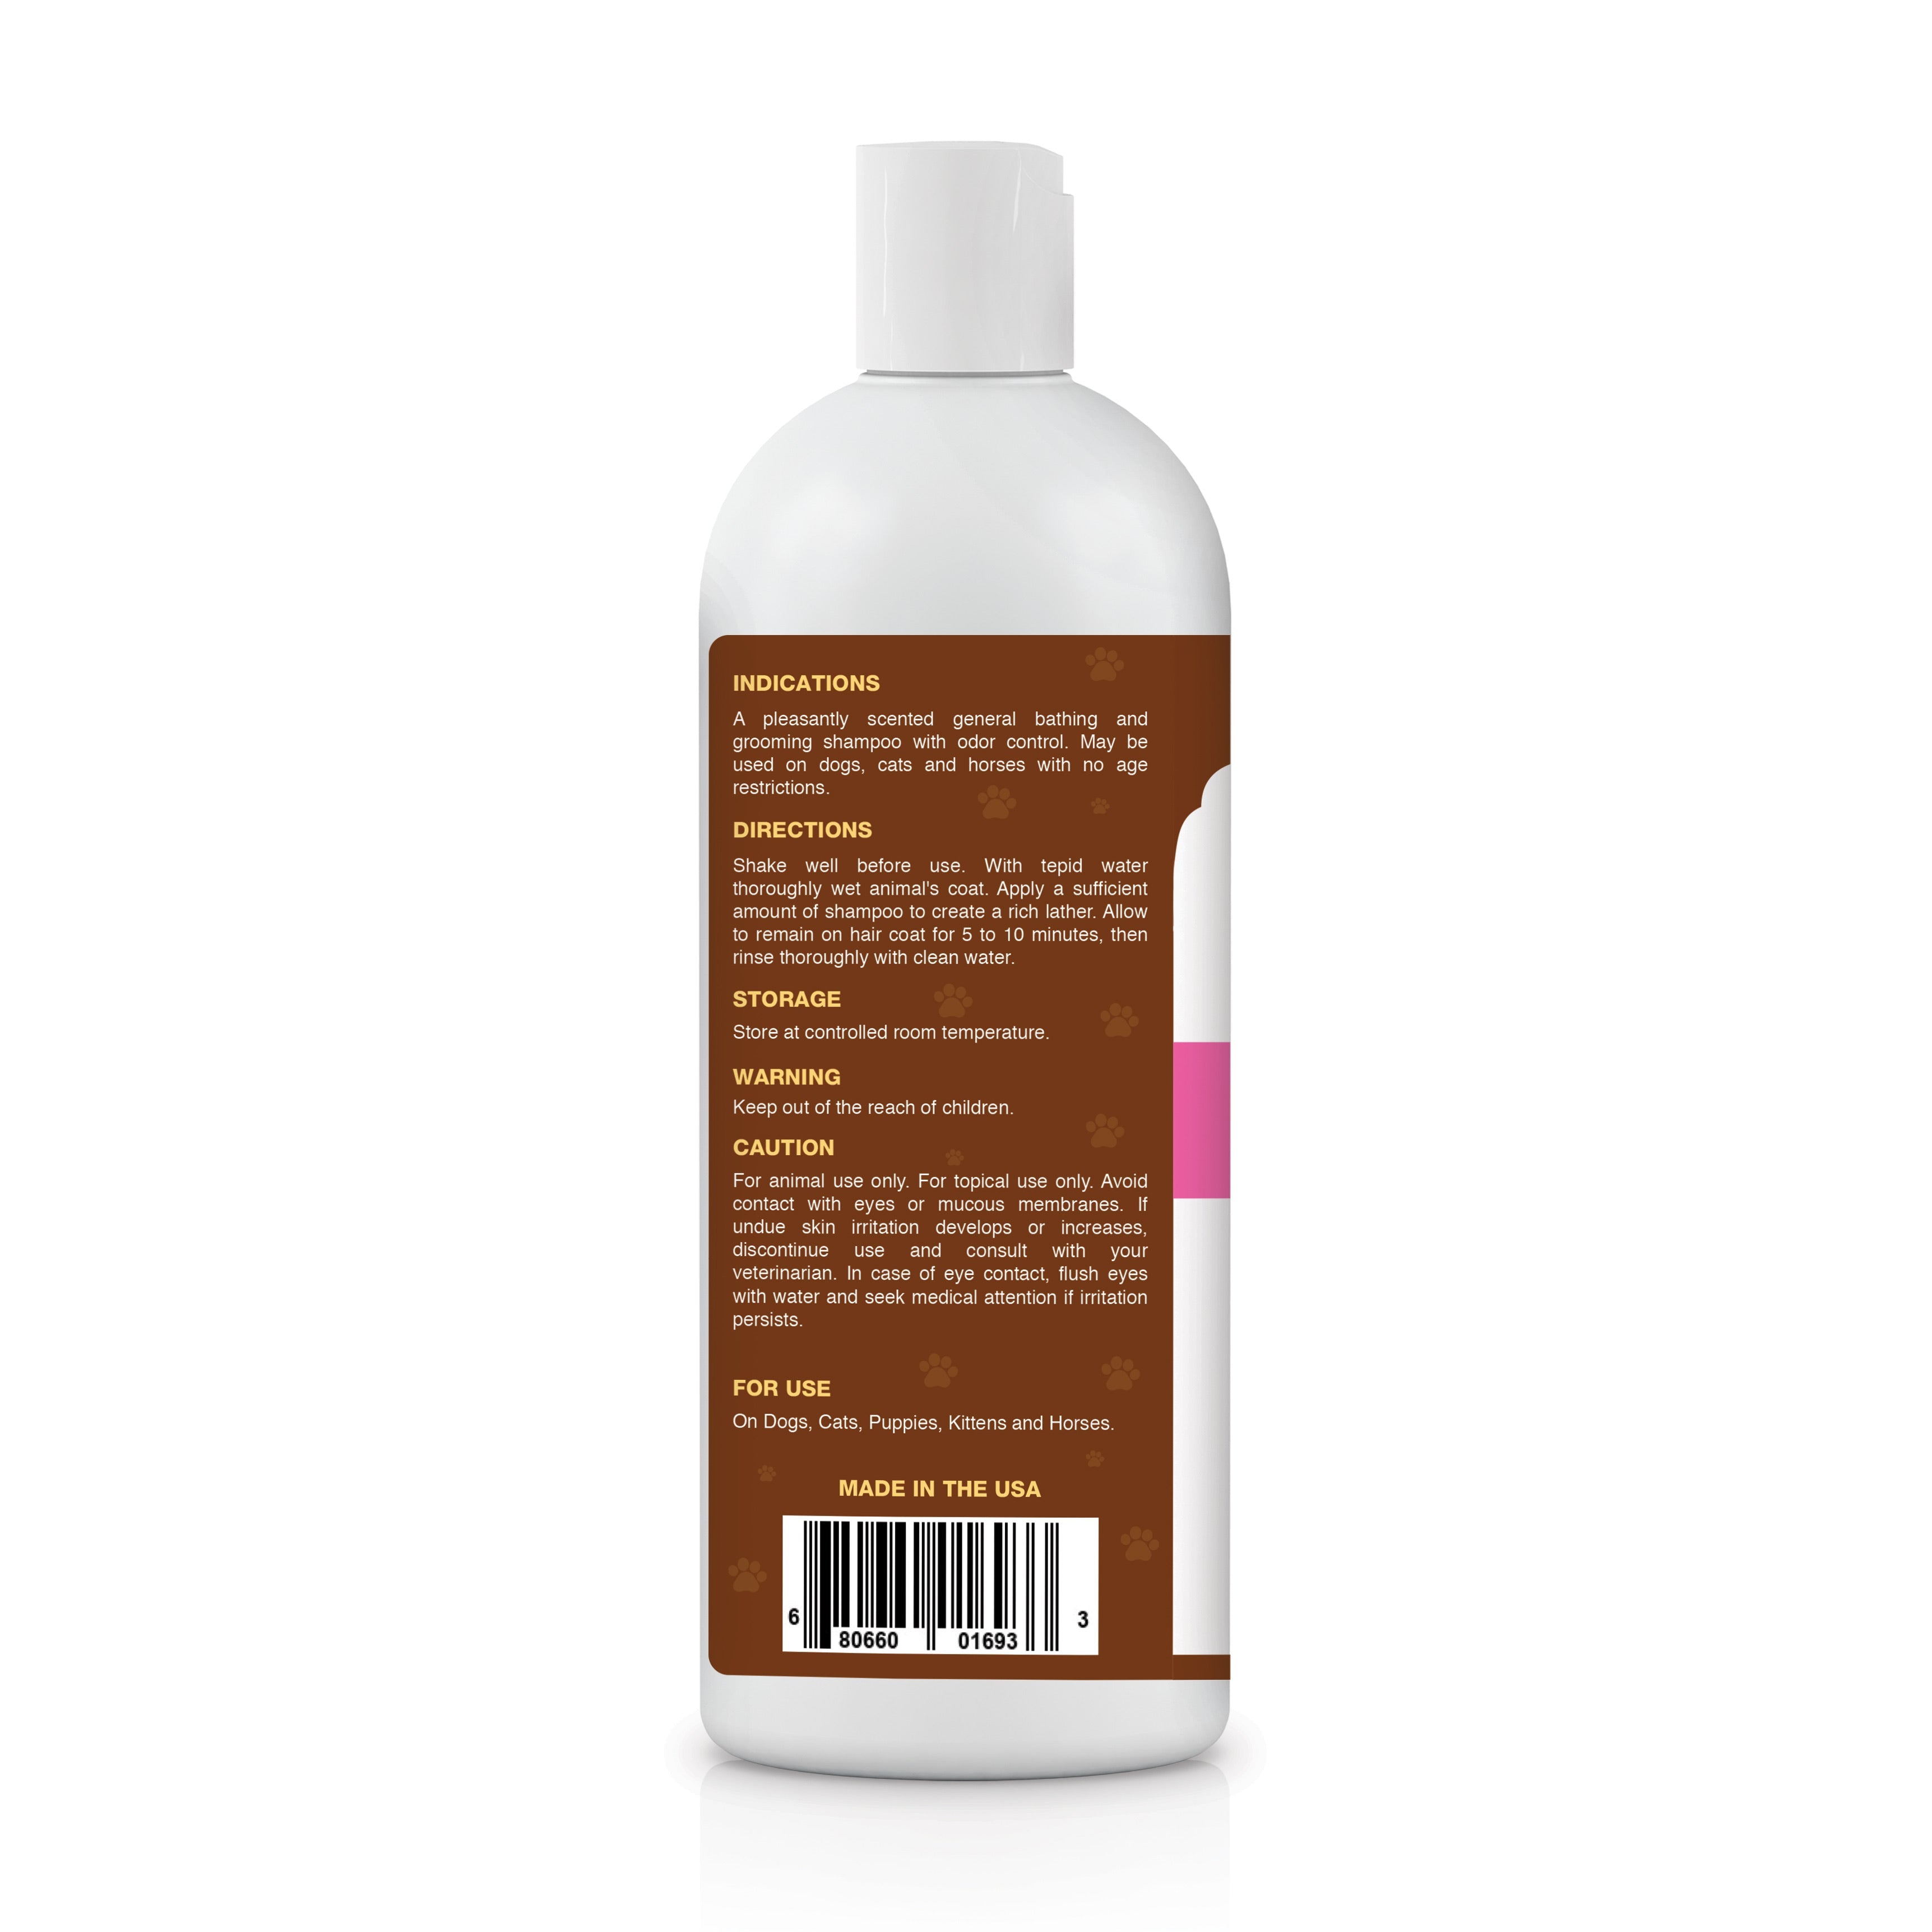 Wagified Shampoo for Dogs and Cats, Sweet Vanilla Bliss, 16 oz